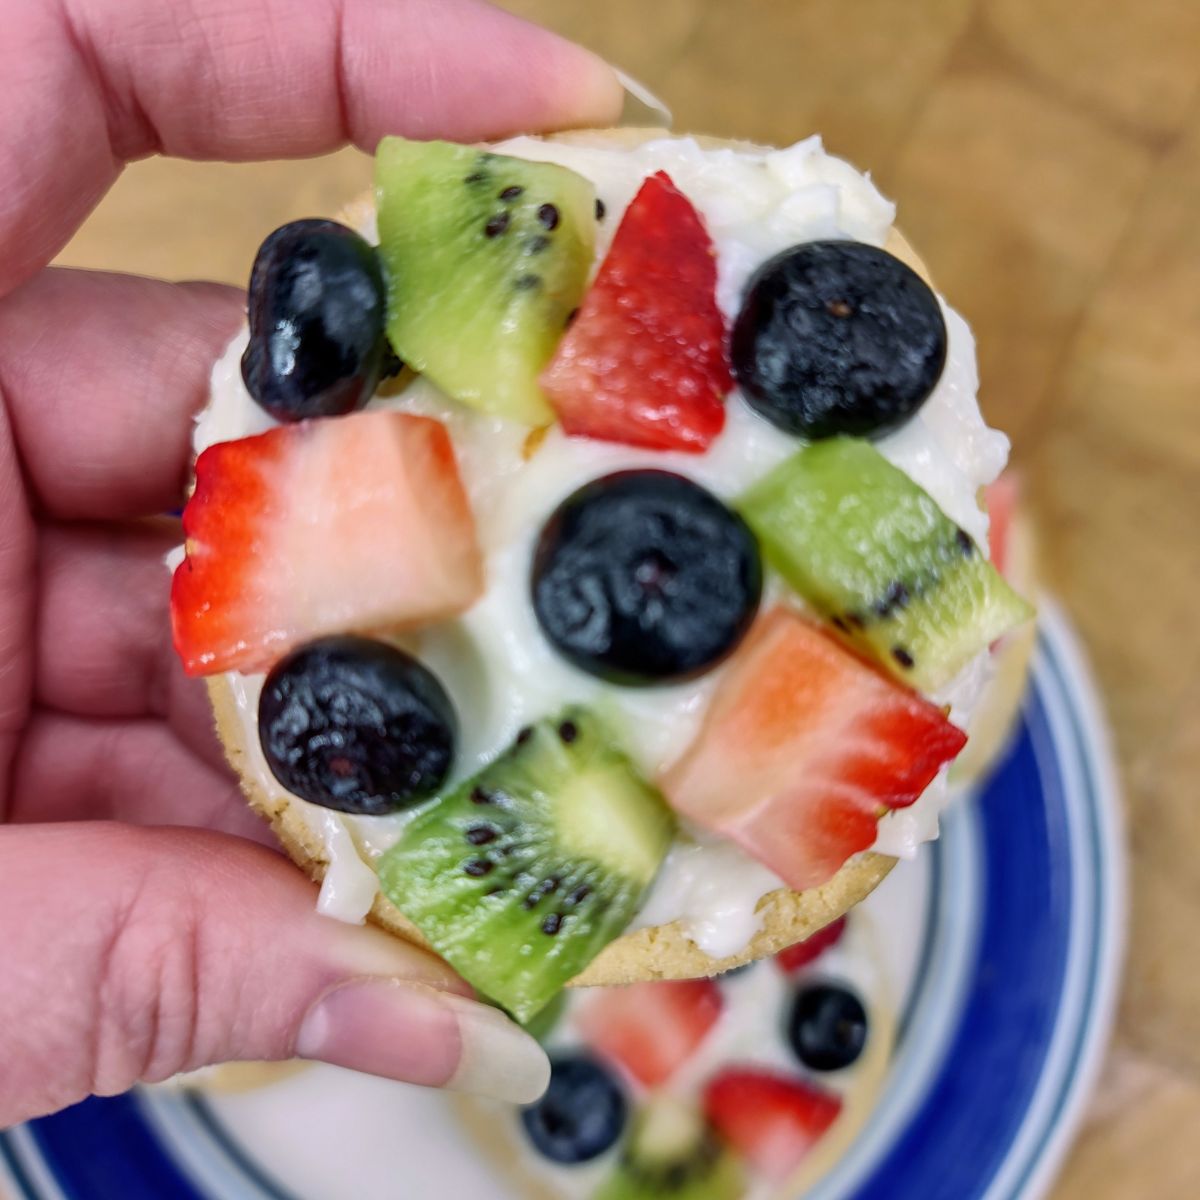 Fruit pizza sugar cookie being held in a hand.